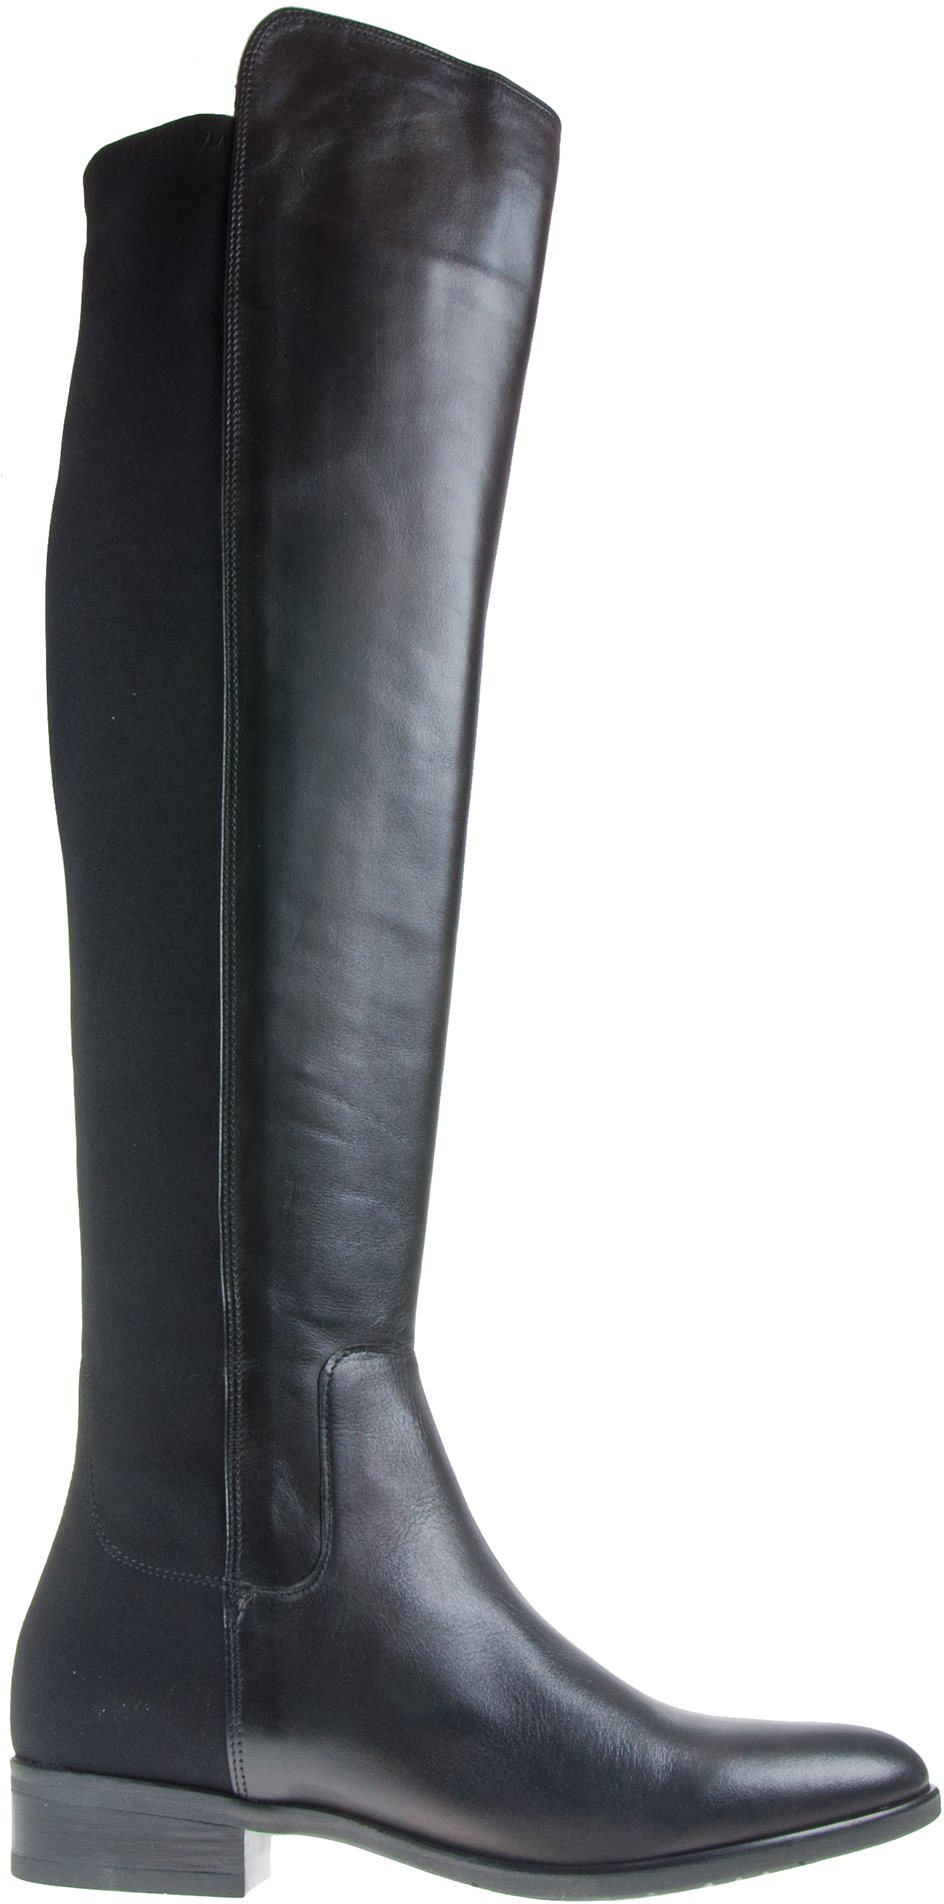 Clarks Caddy Belle Black Leather 26107904 - Over the Knee Boots ...